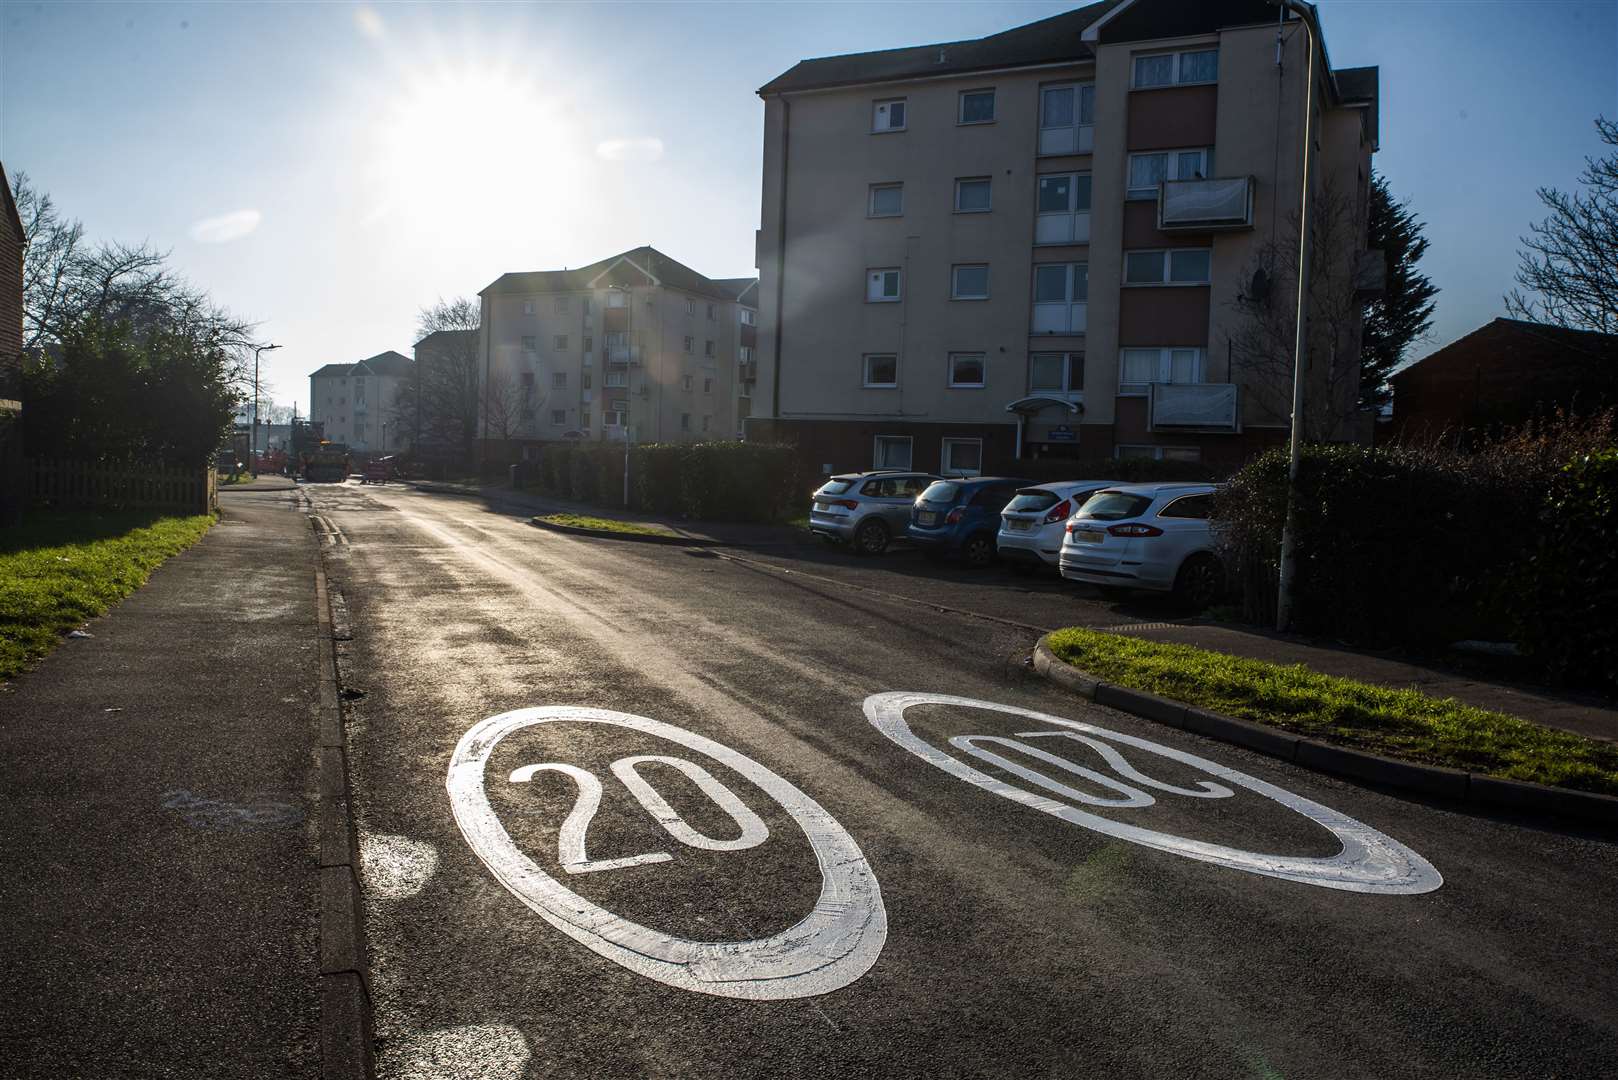 New 20mph road markings have appeared in Bockhanger and surrounding roads. Picture: Ellie Crook